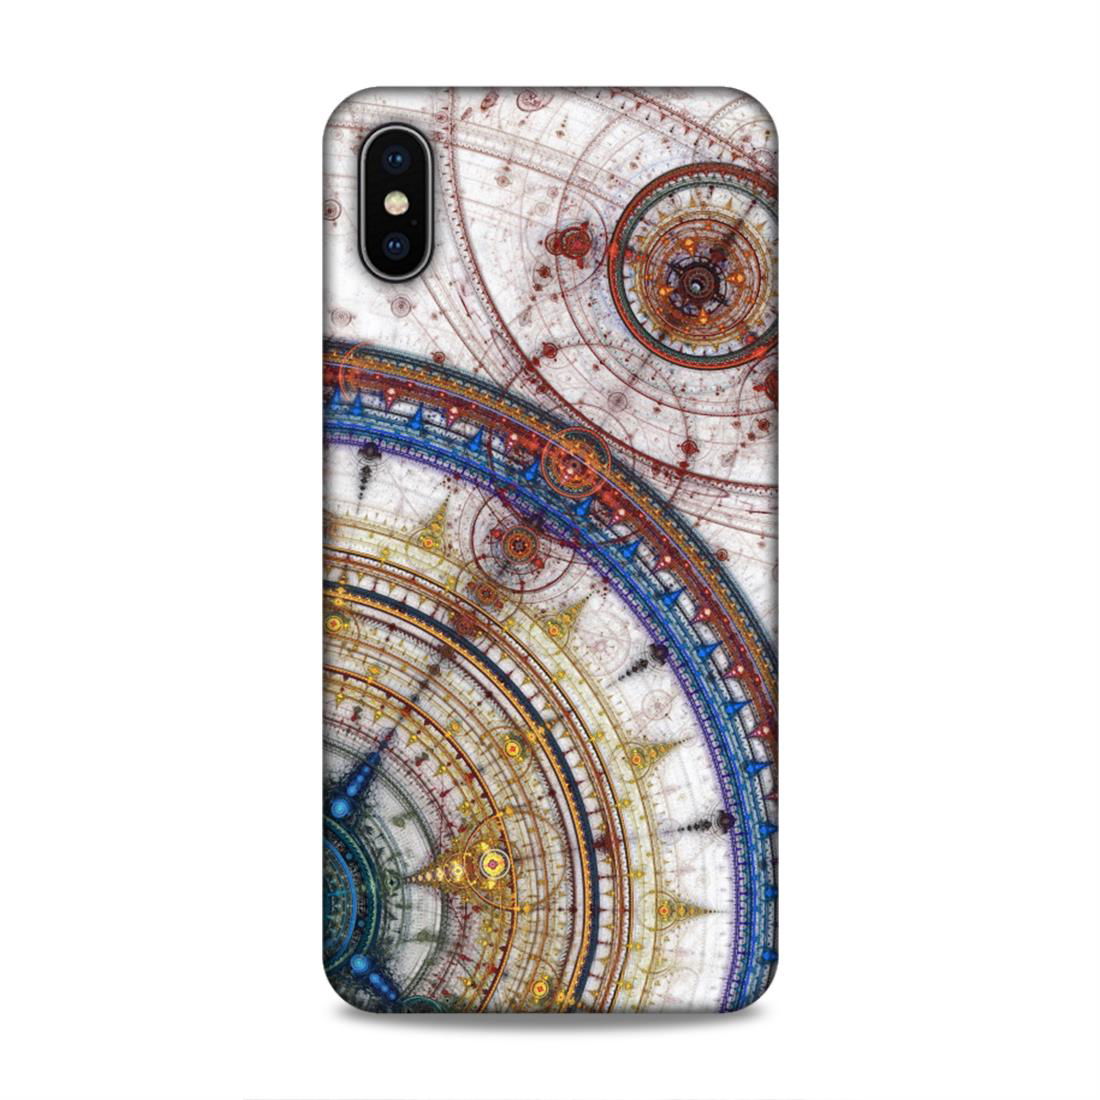 Geometric Art Hard Back Case For Apple iPhone XS Max - Right Marc